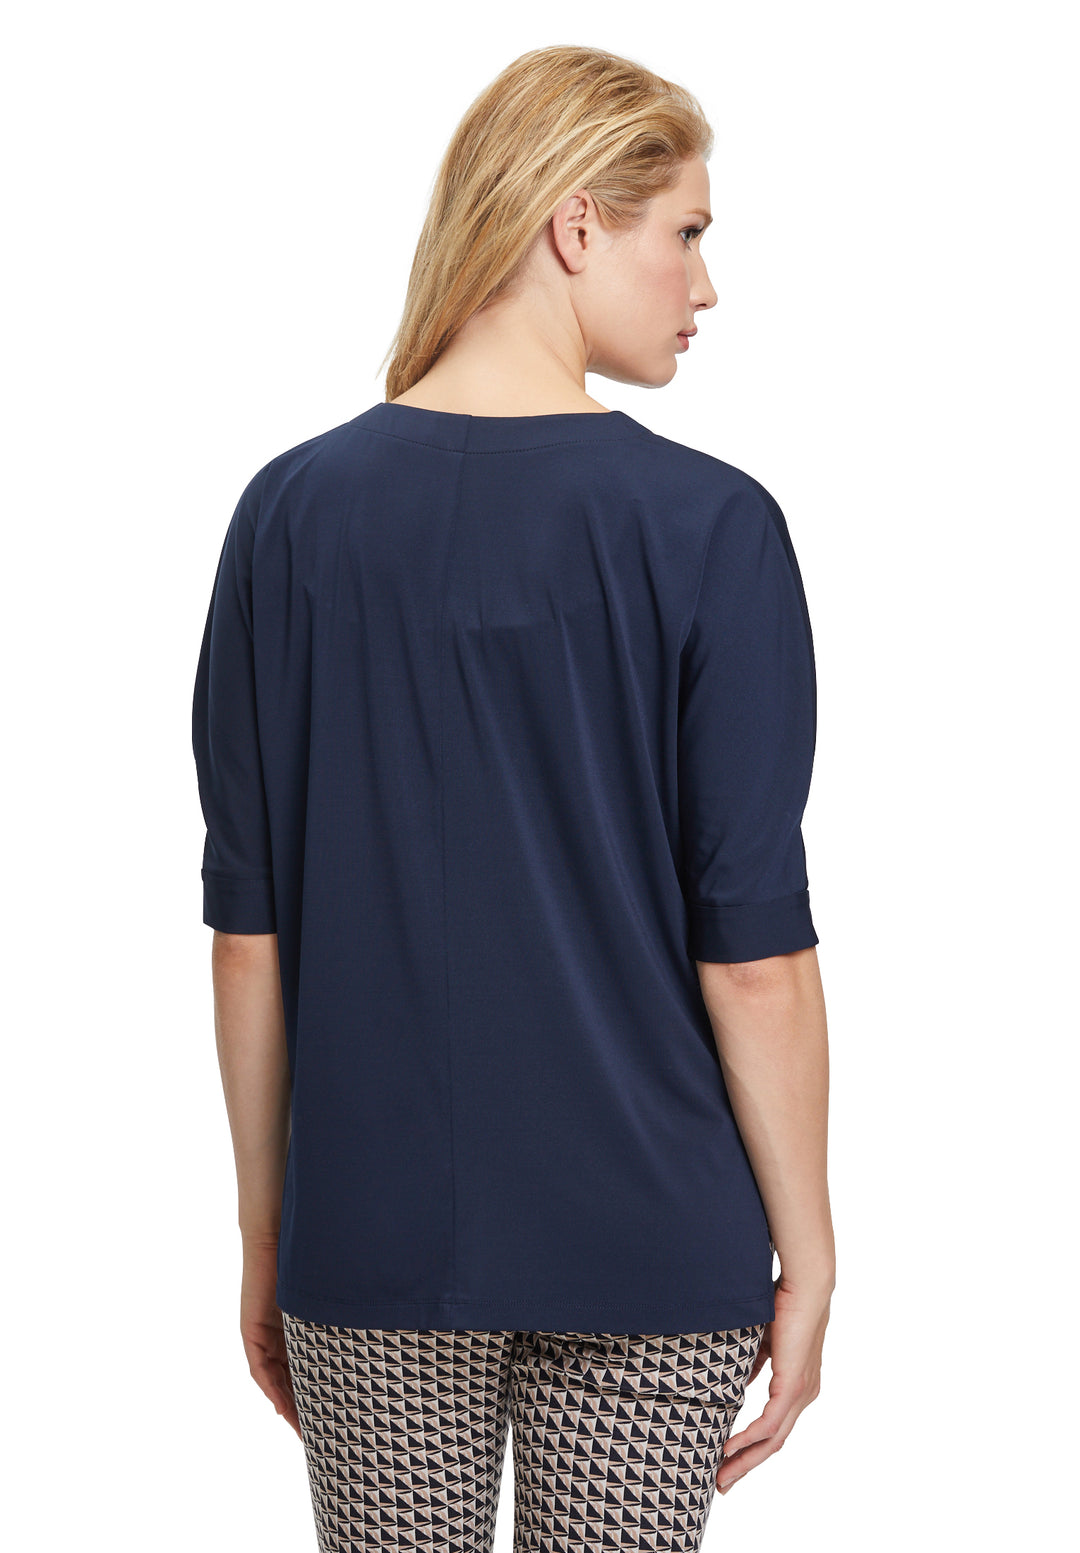 Betty Barclay 2682 1217 8345 Shirt with 1/2 Sleeves Navy 4